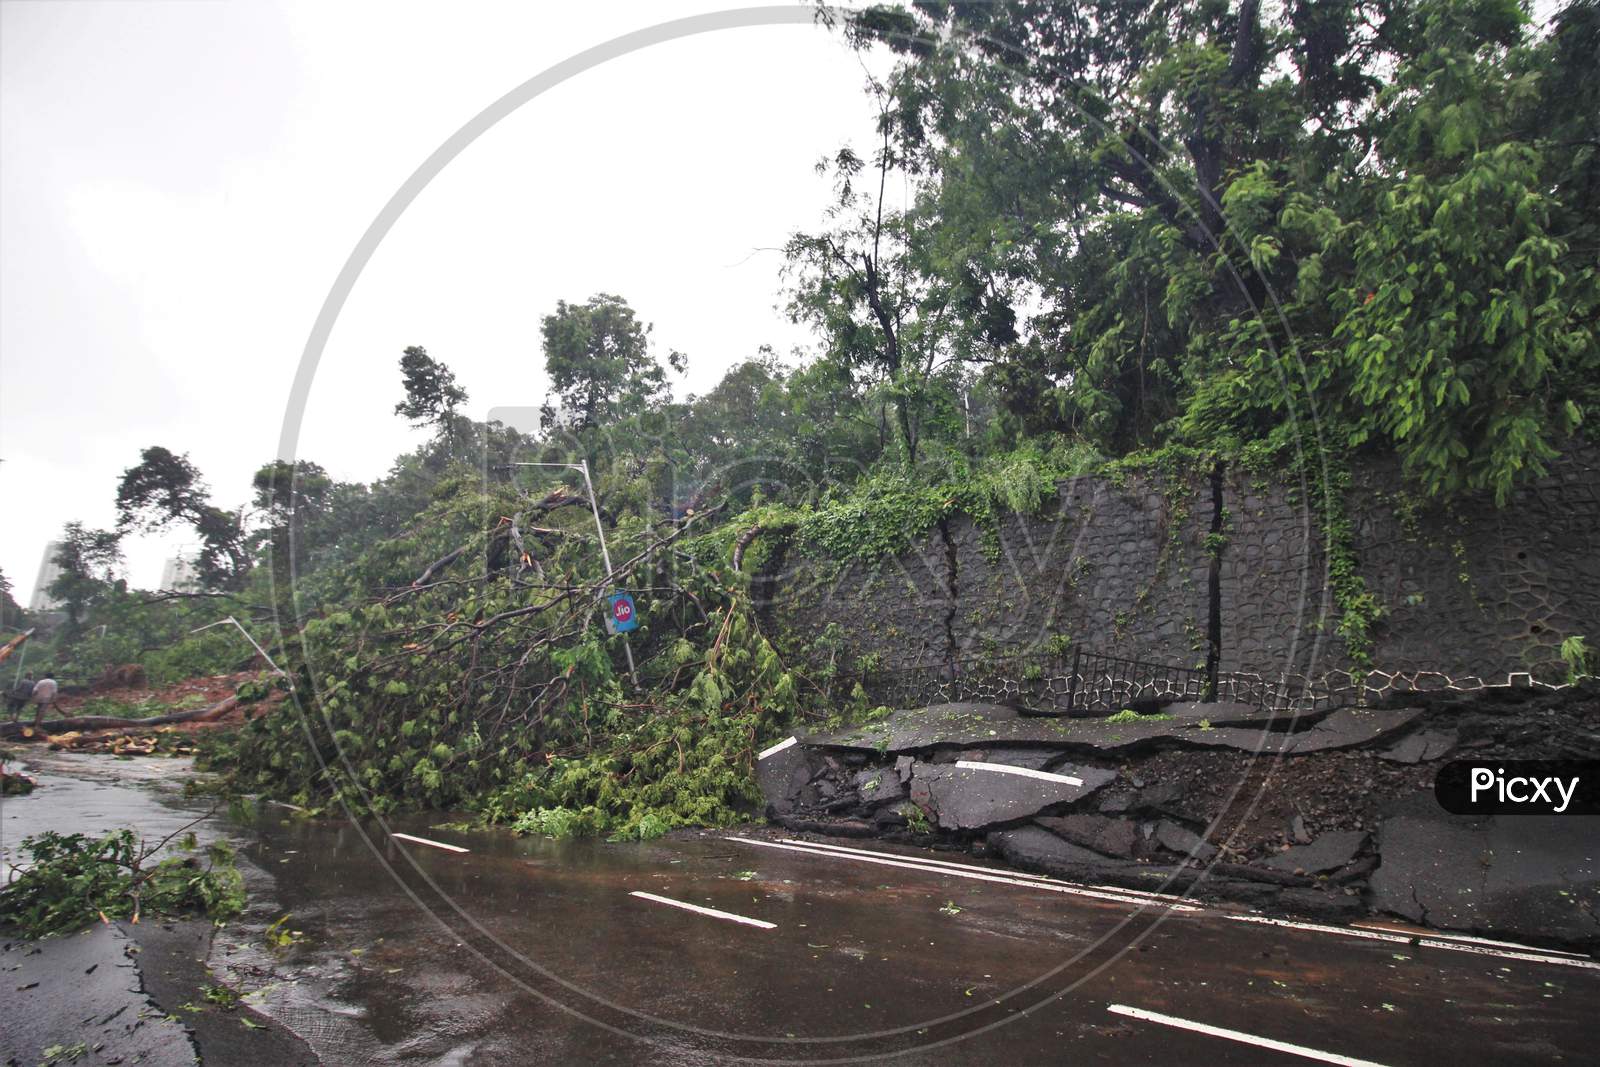 A general view shows the site of a collapsed portion of a retaining wall along a road following heavy rainfall, in Mumbai, India on August 6, 2020.